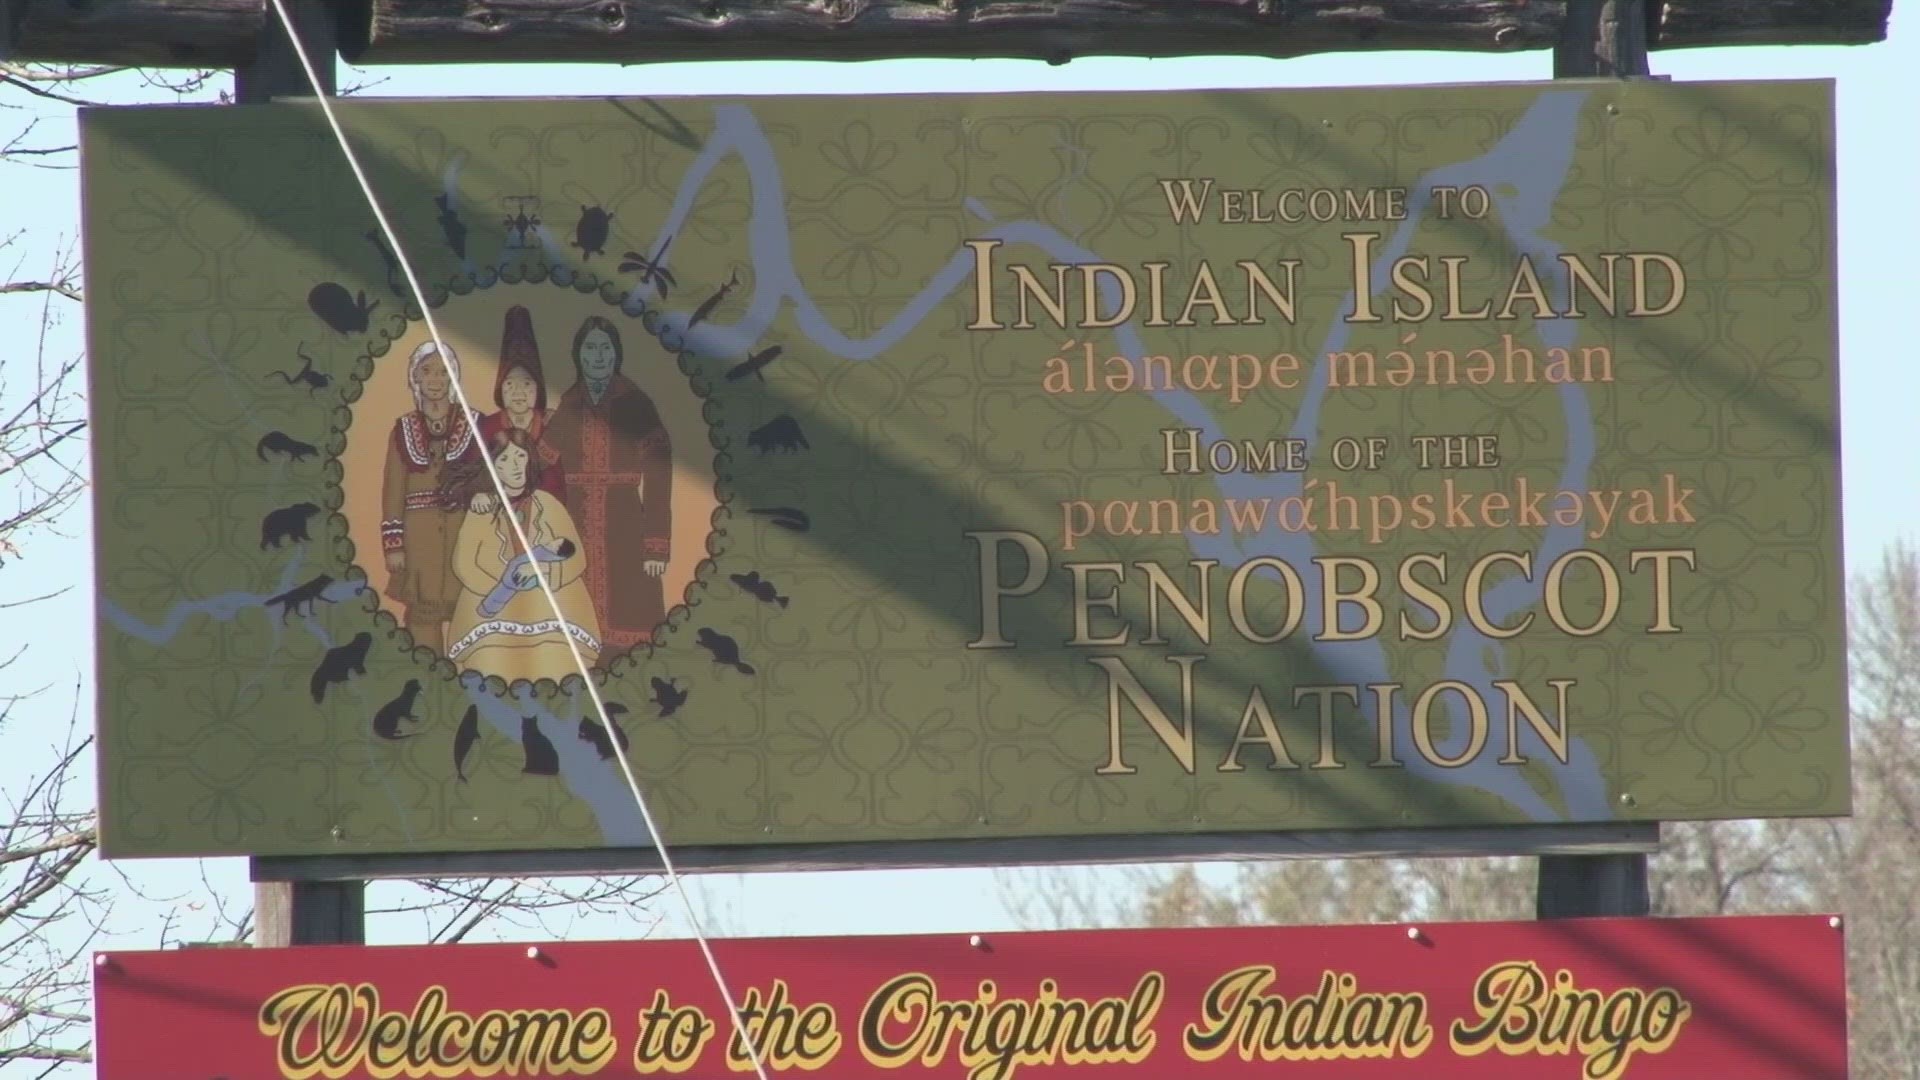 The Penobscot Nation members contend the abuse started when they were 7 to 16 years old at St. Ann Parish on Indian Island.